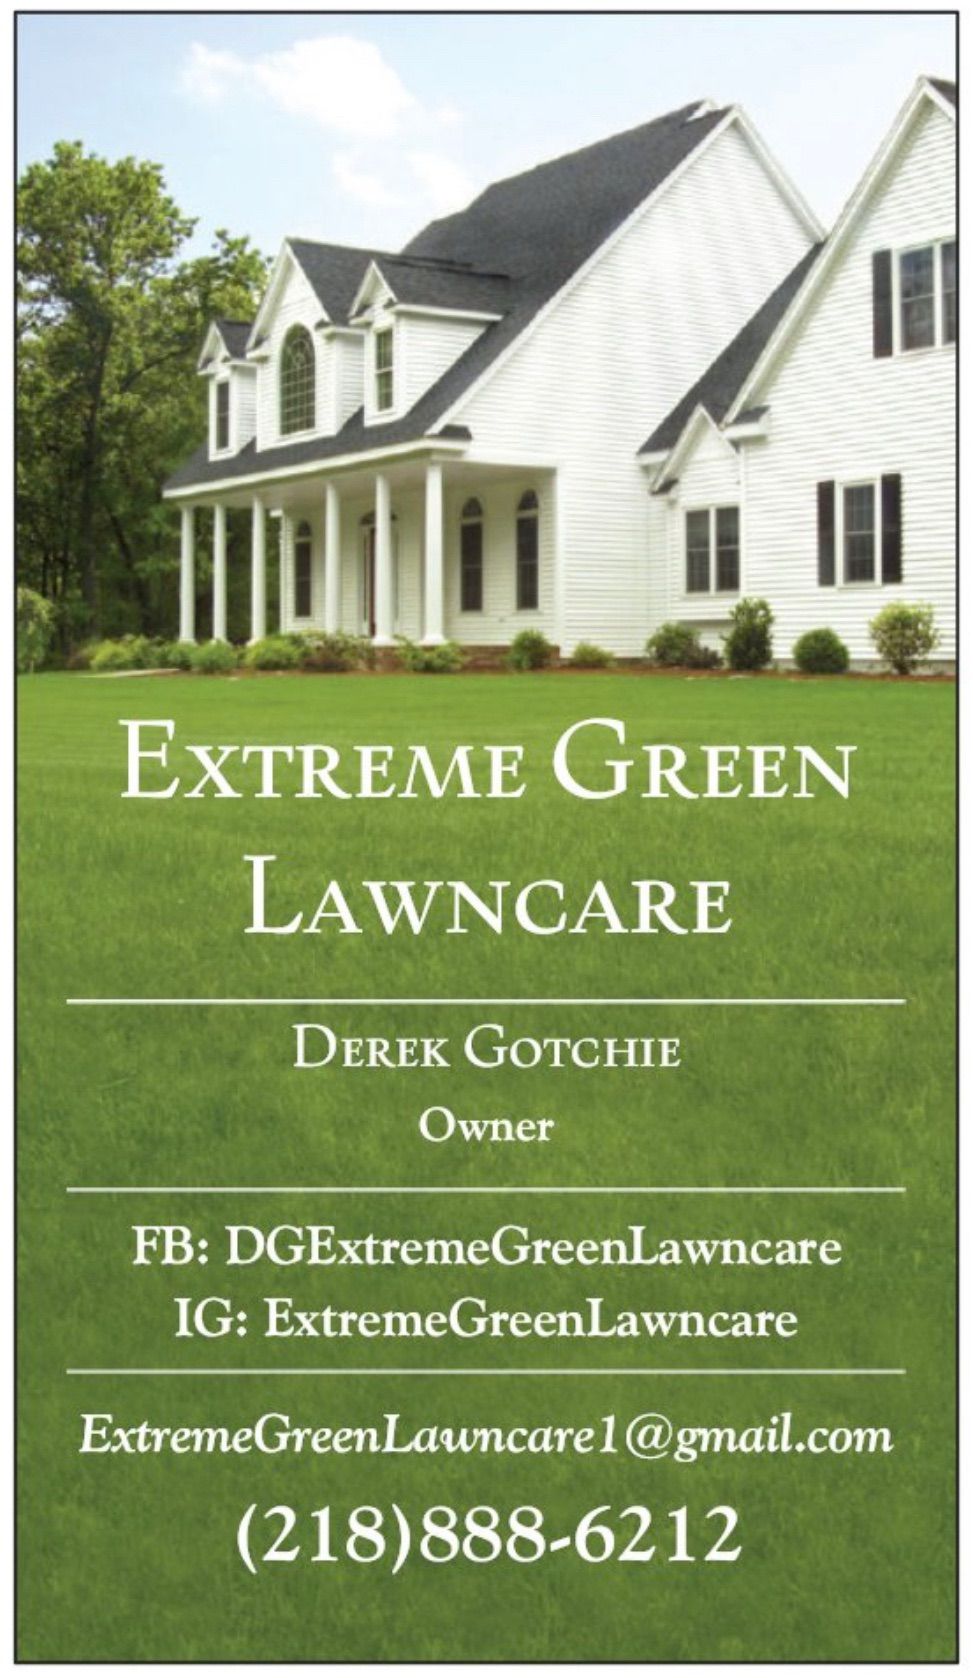 Extreme Green Lawncare